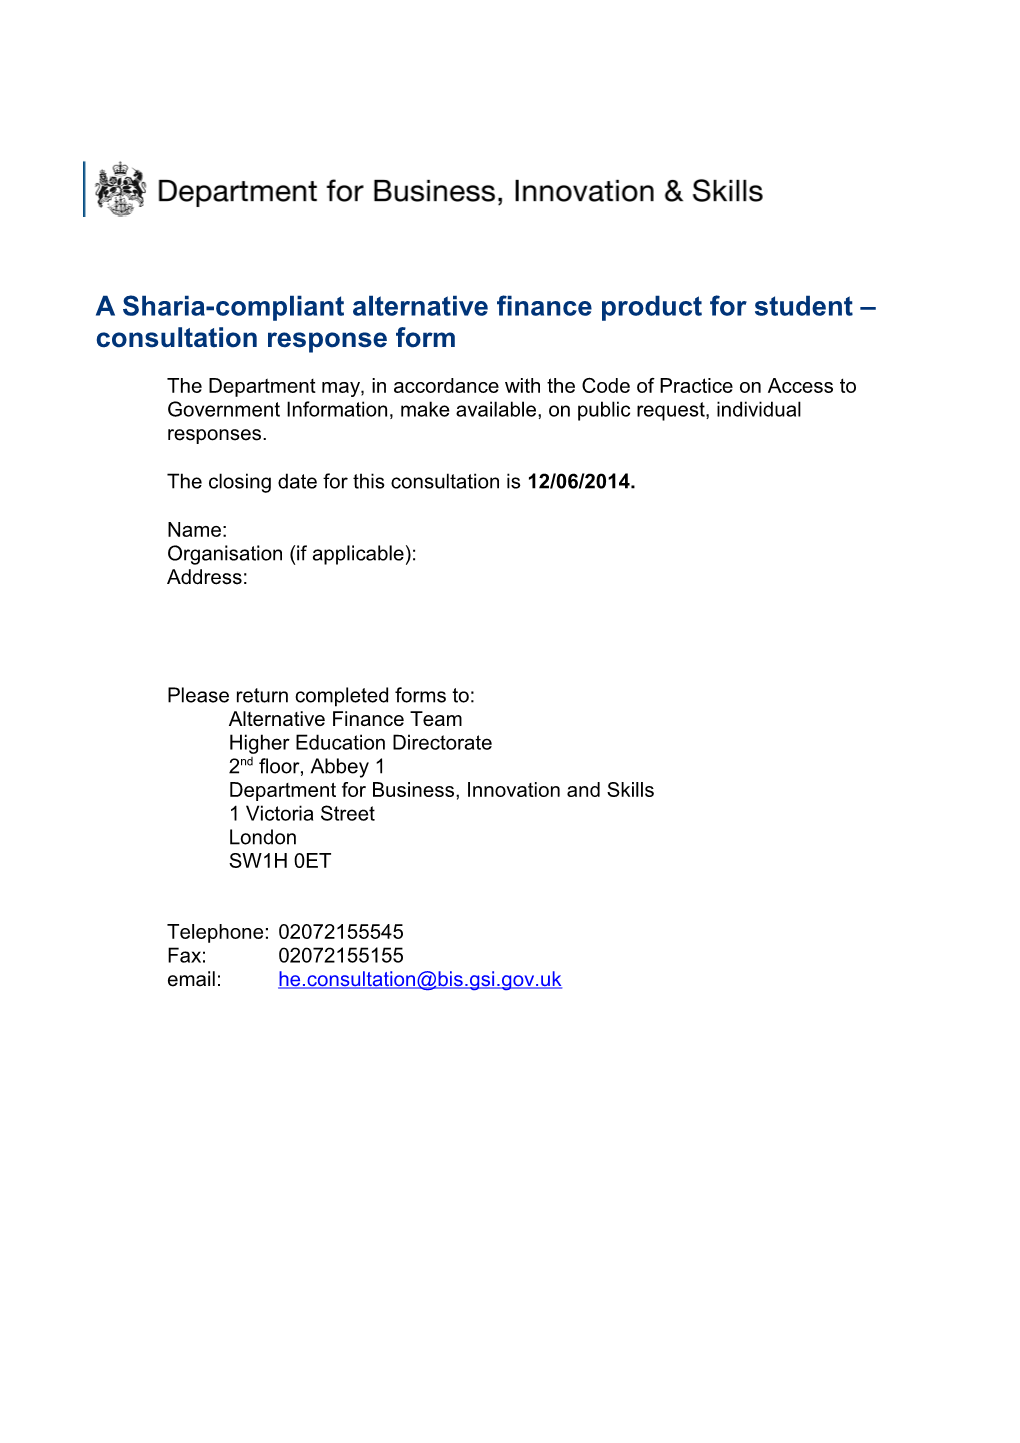 A Shariah-Compliant Alternative Finance Product for Student Consultation Response Form